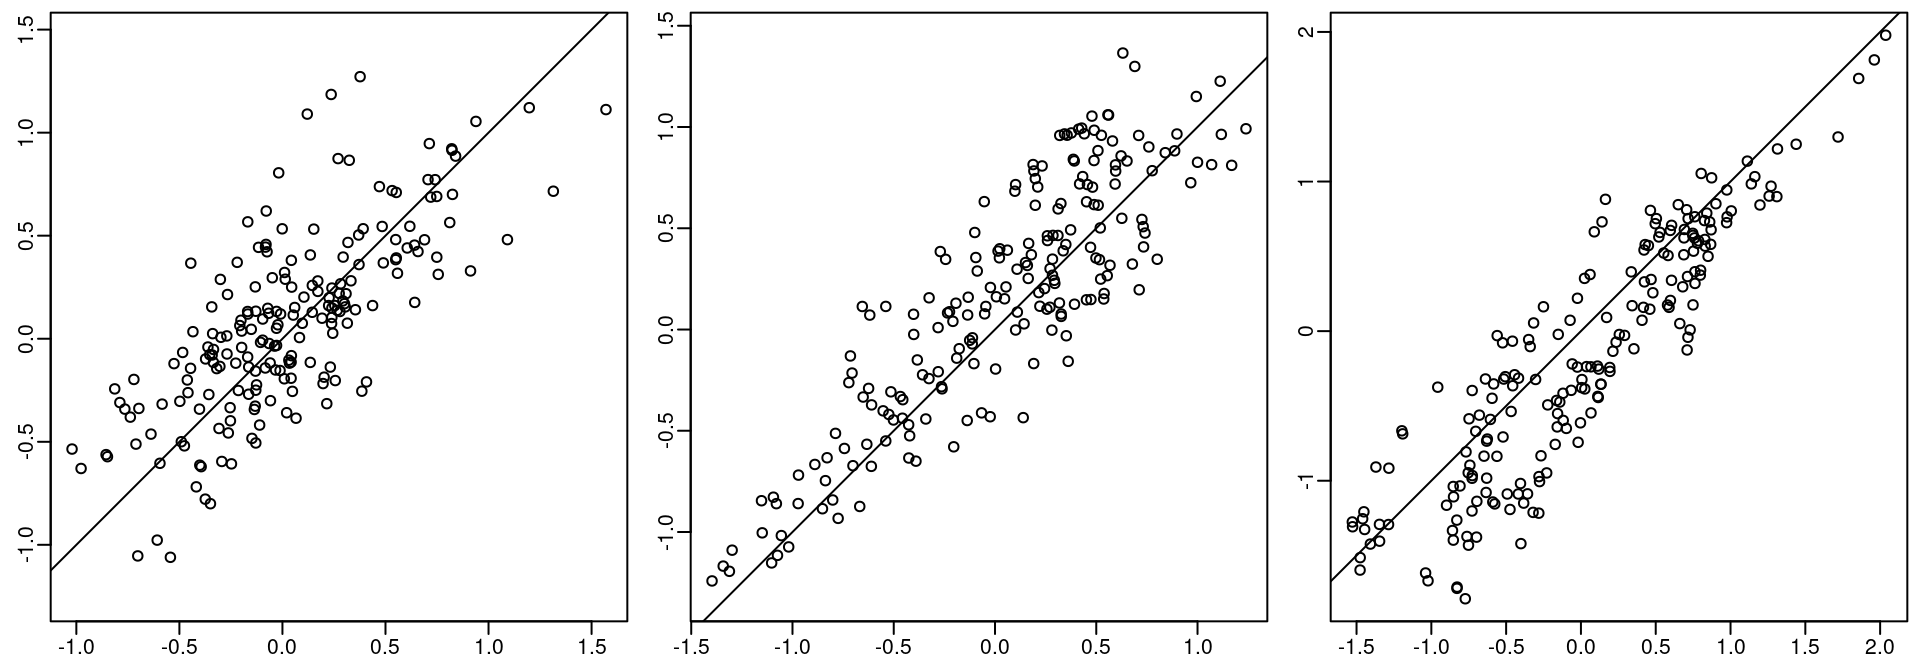 True and fitted random field values.